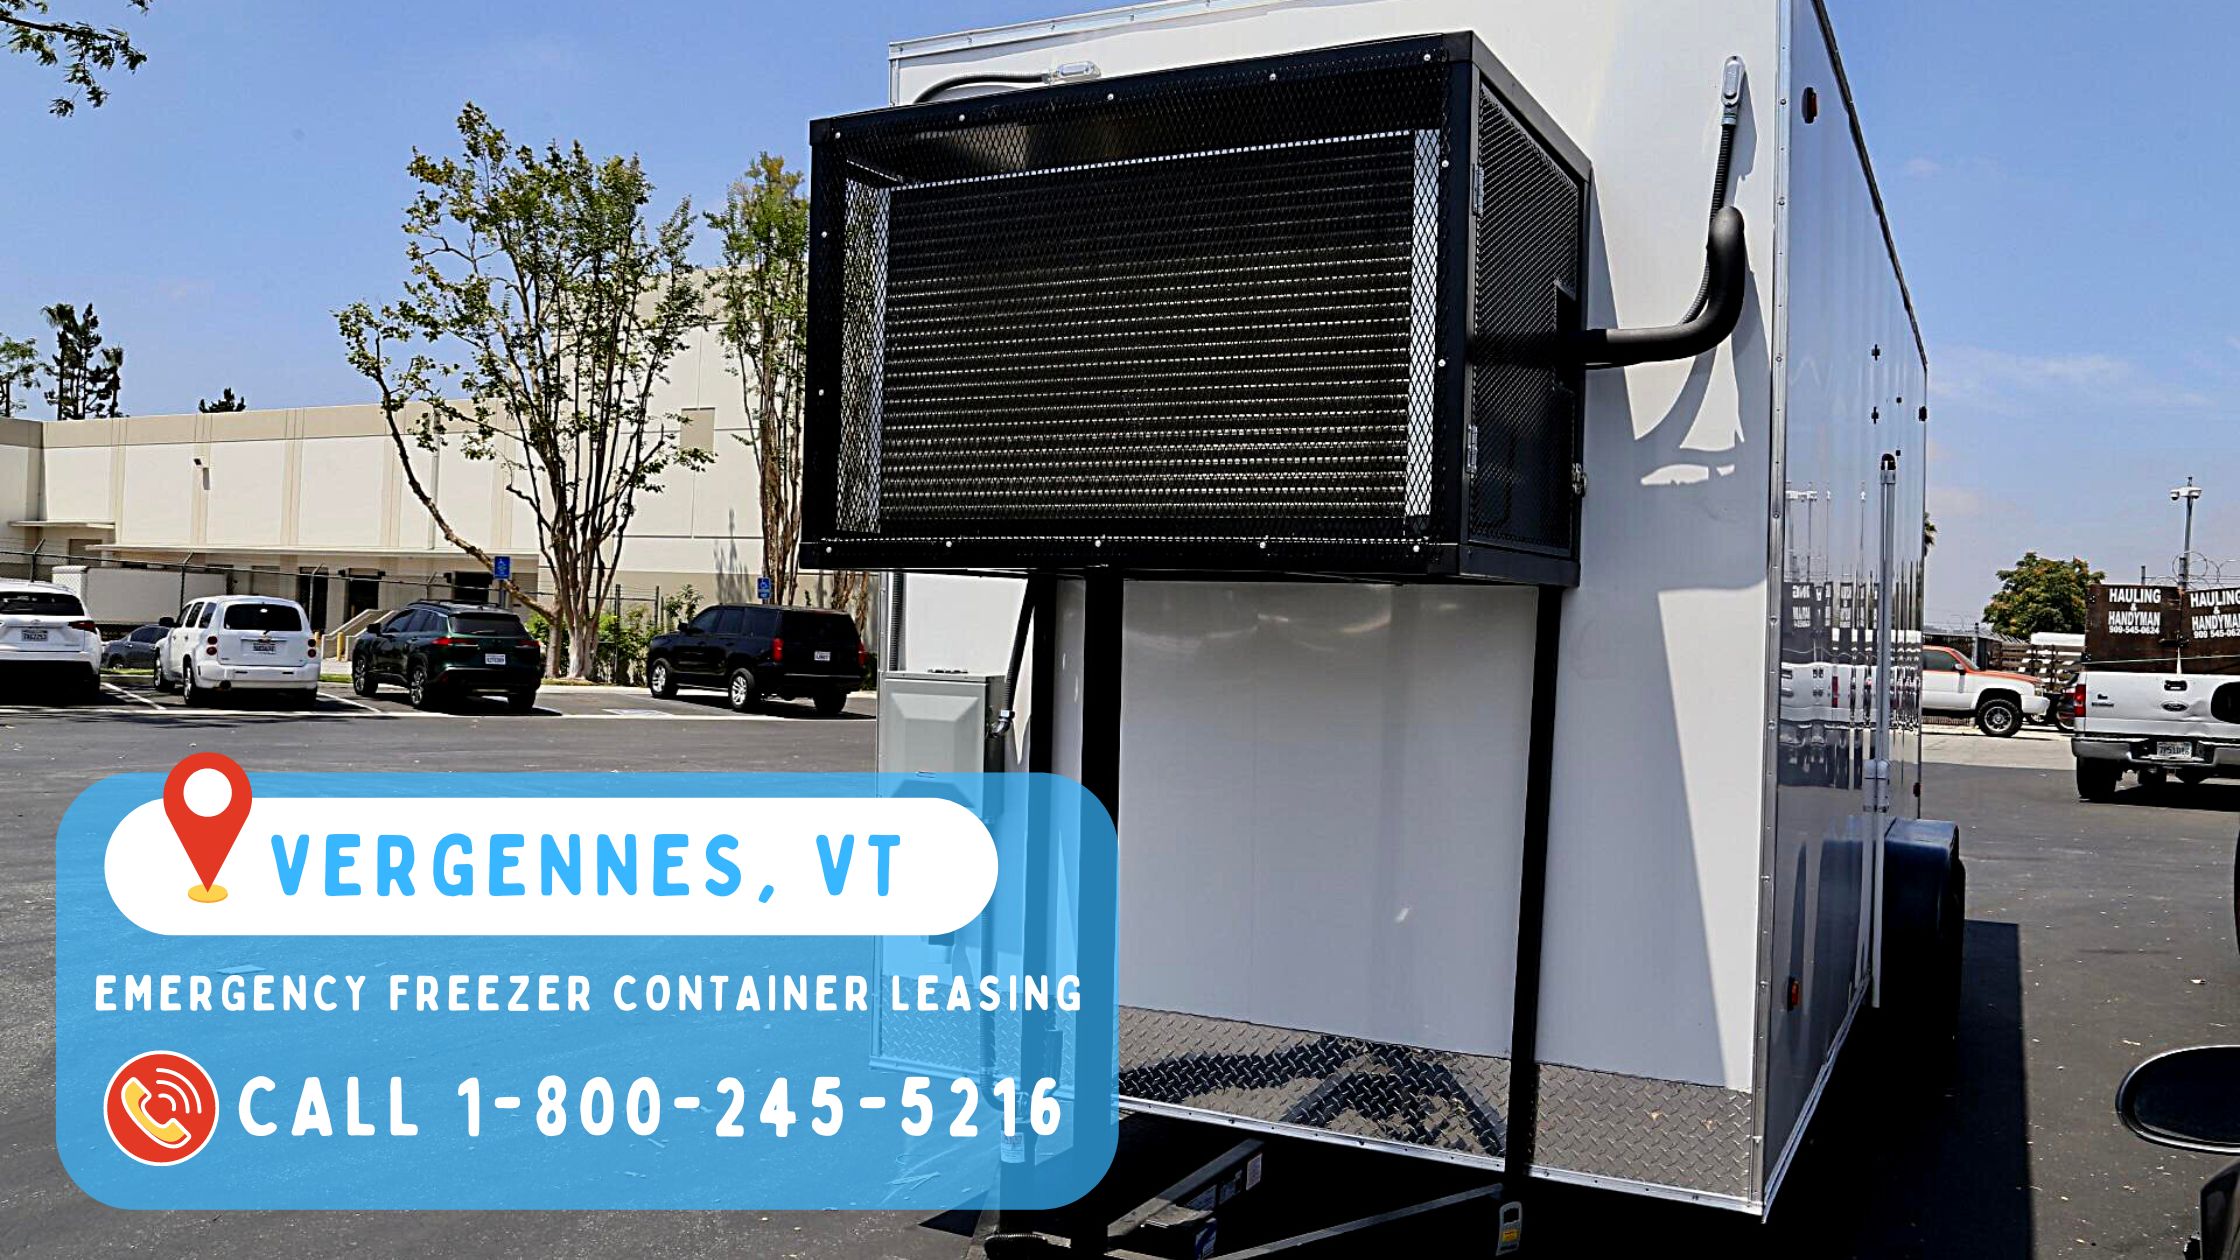 Emergency Freezer Container Leasing in Vergennes